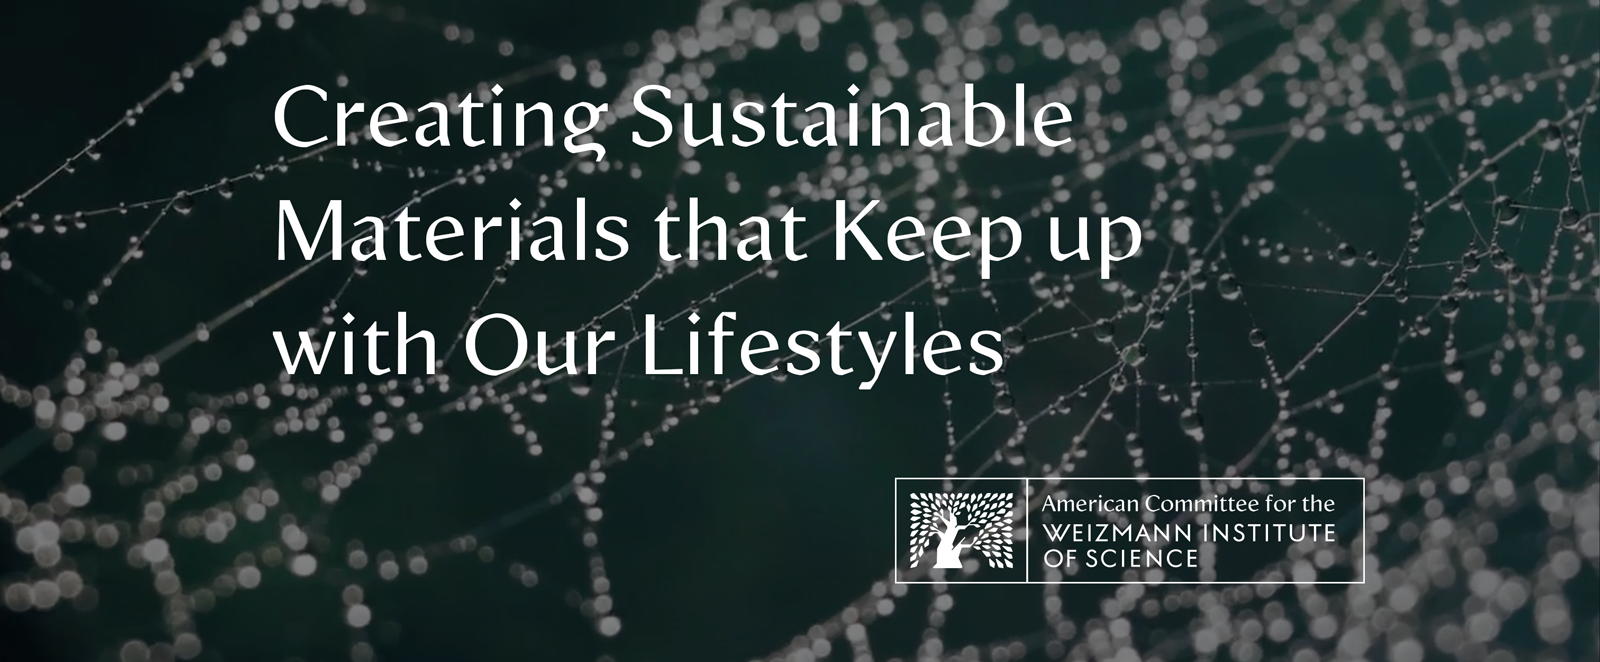 Creating Sustainable Materials that Keep up with Our Lifestyles